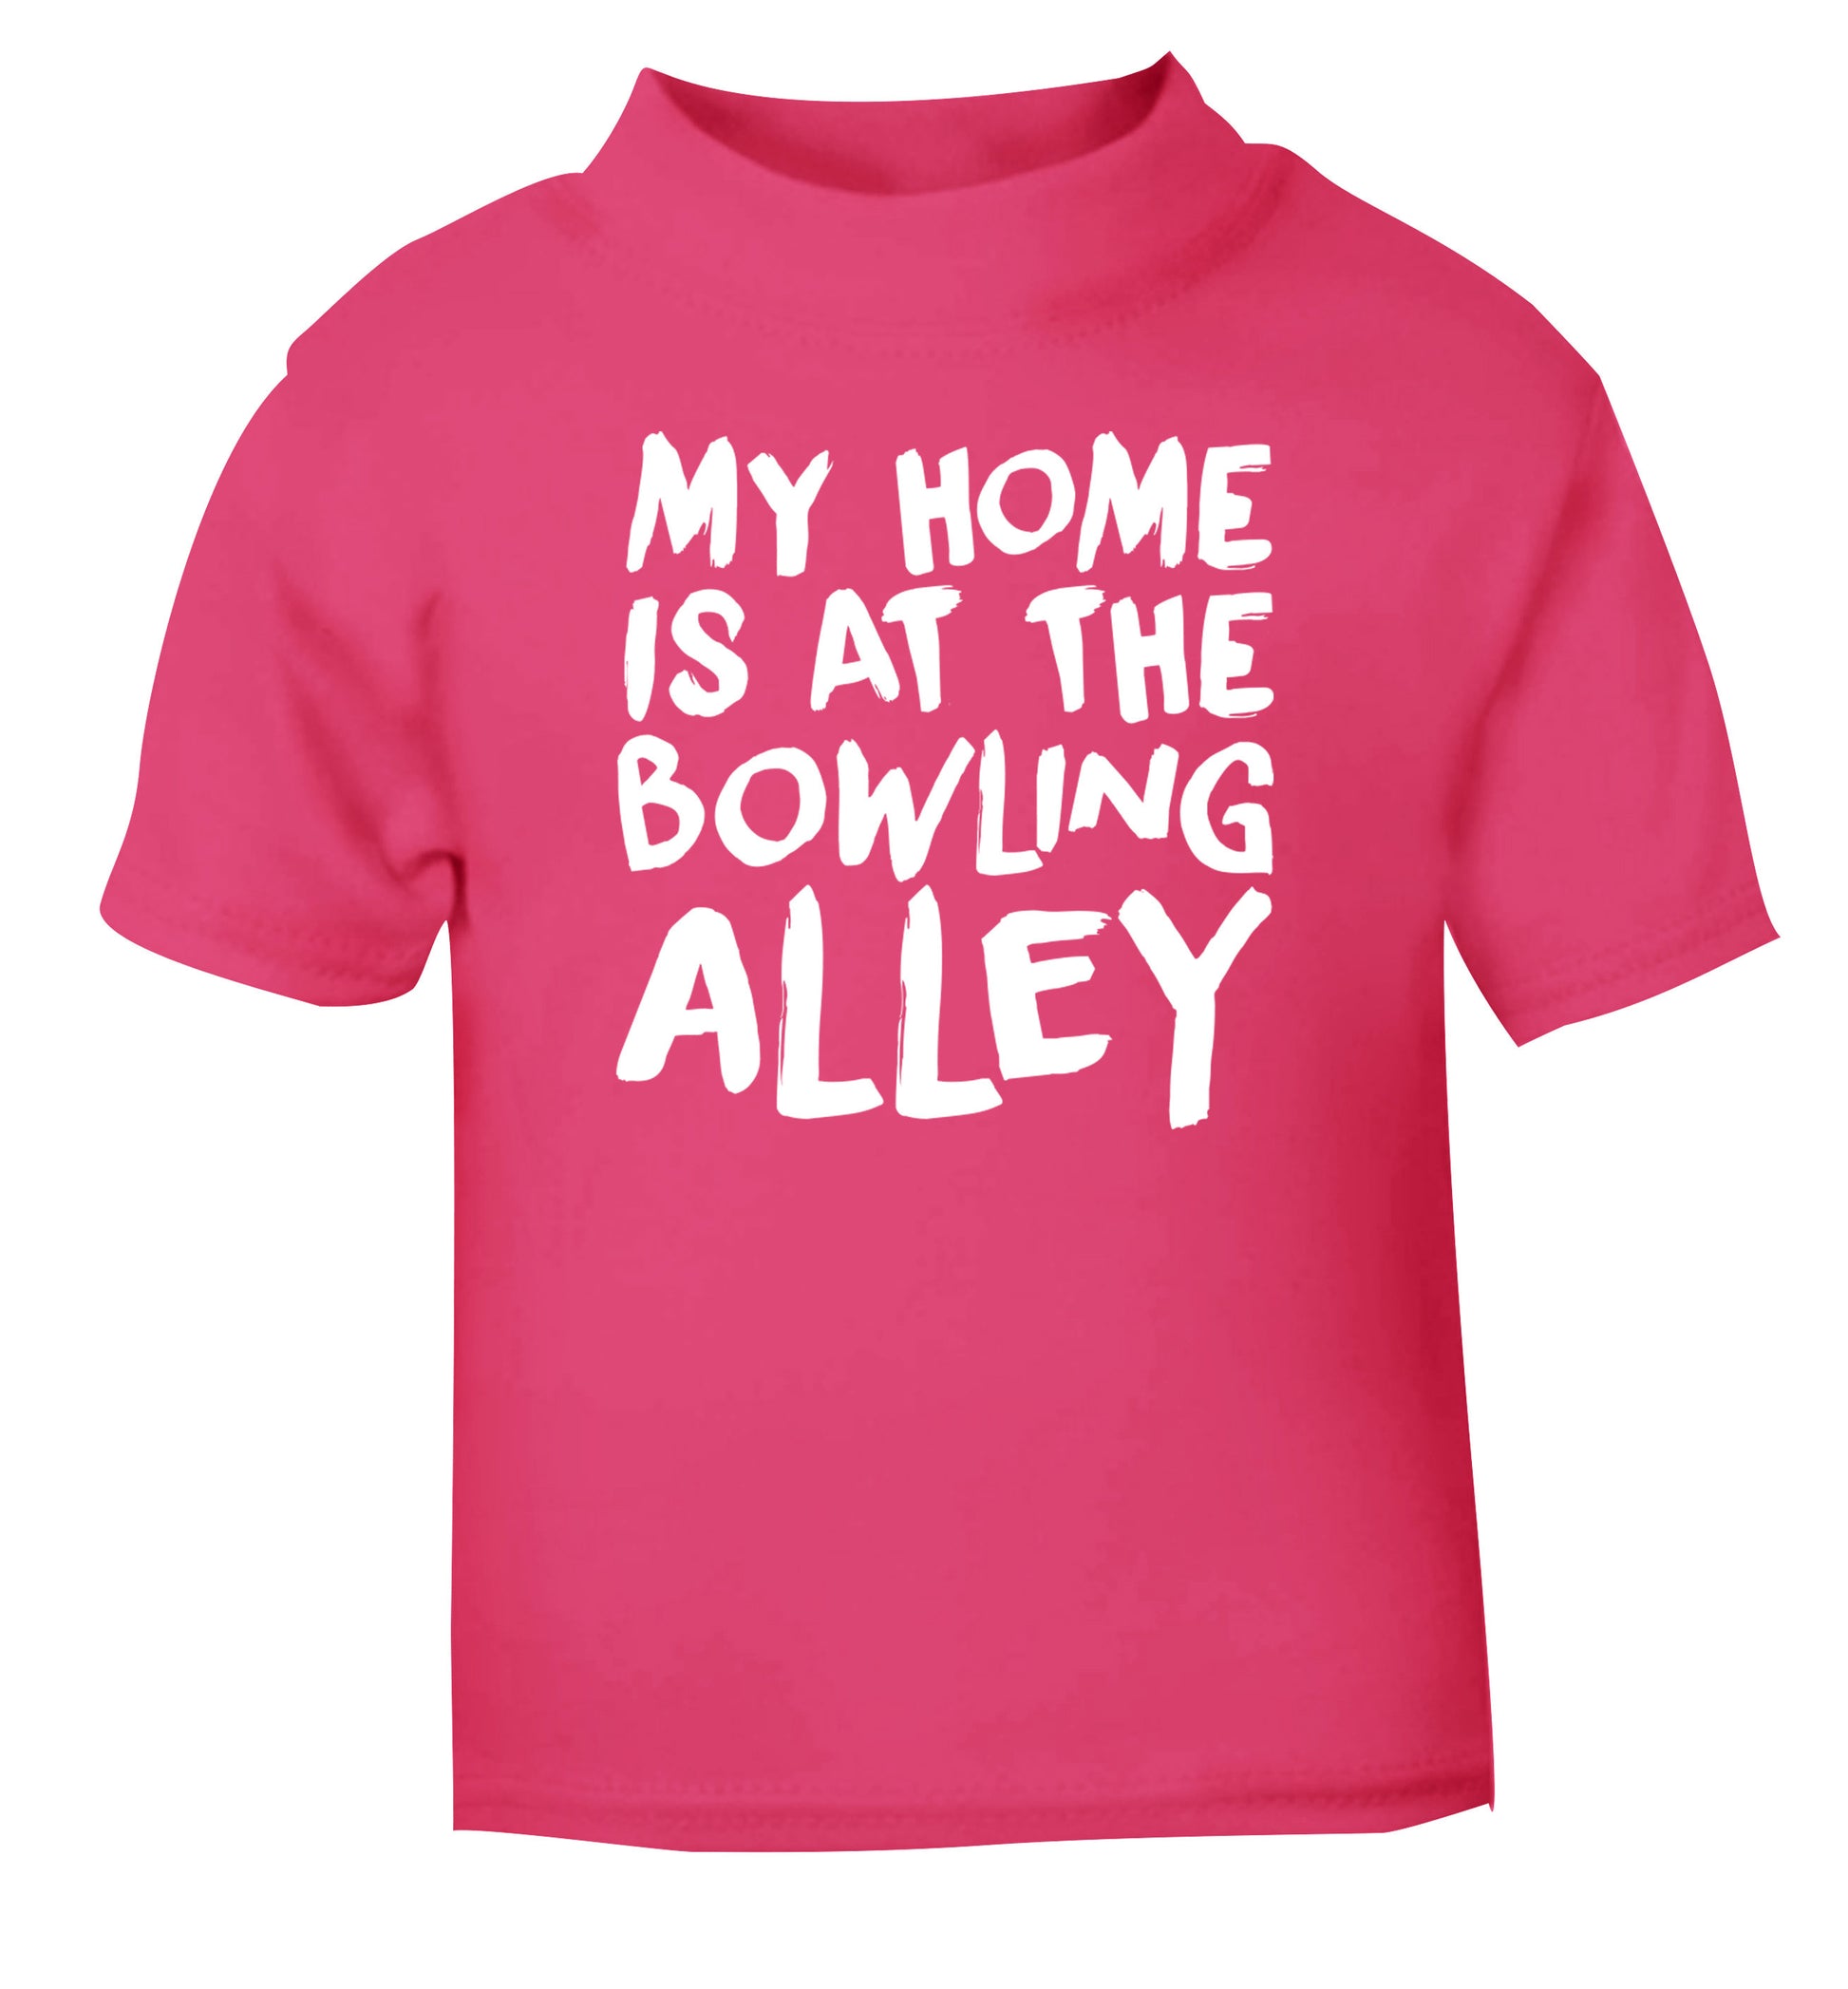 My home is at the bowling alley pink Baby Toddler Tshirt 2 Years